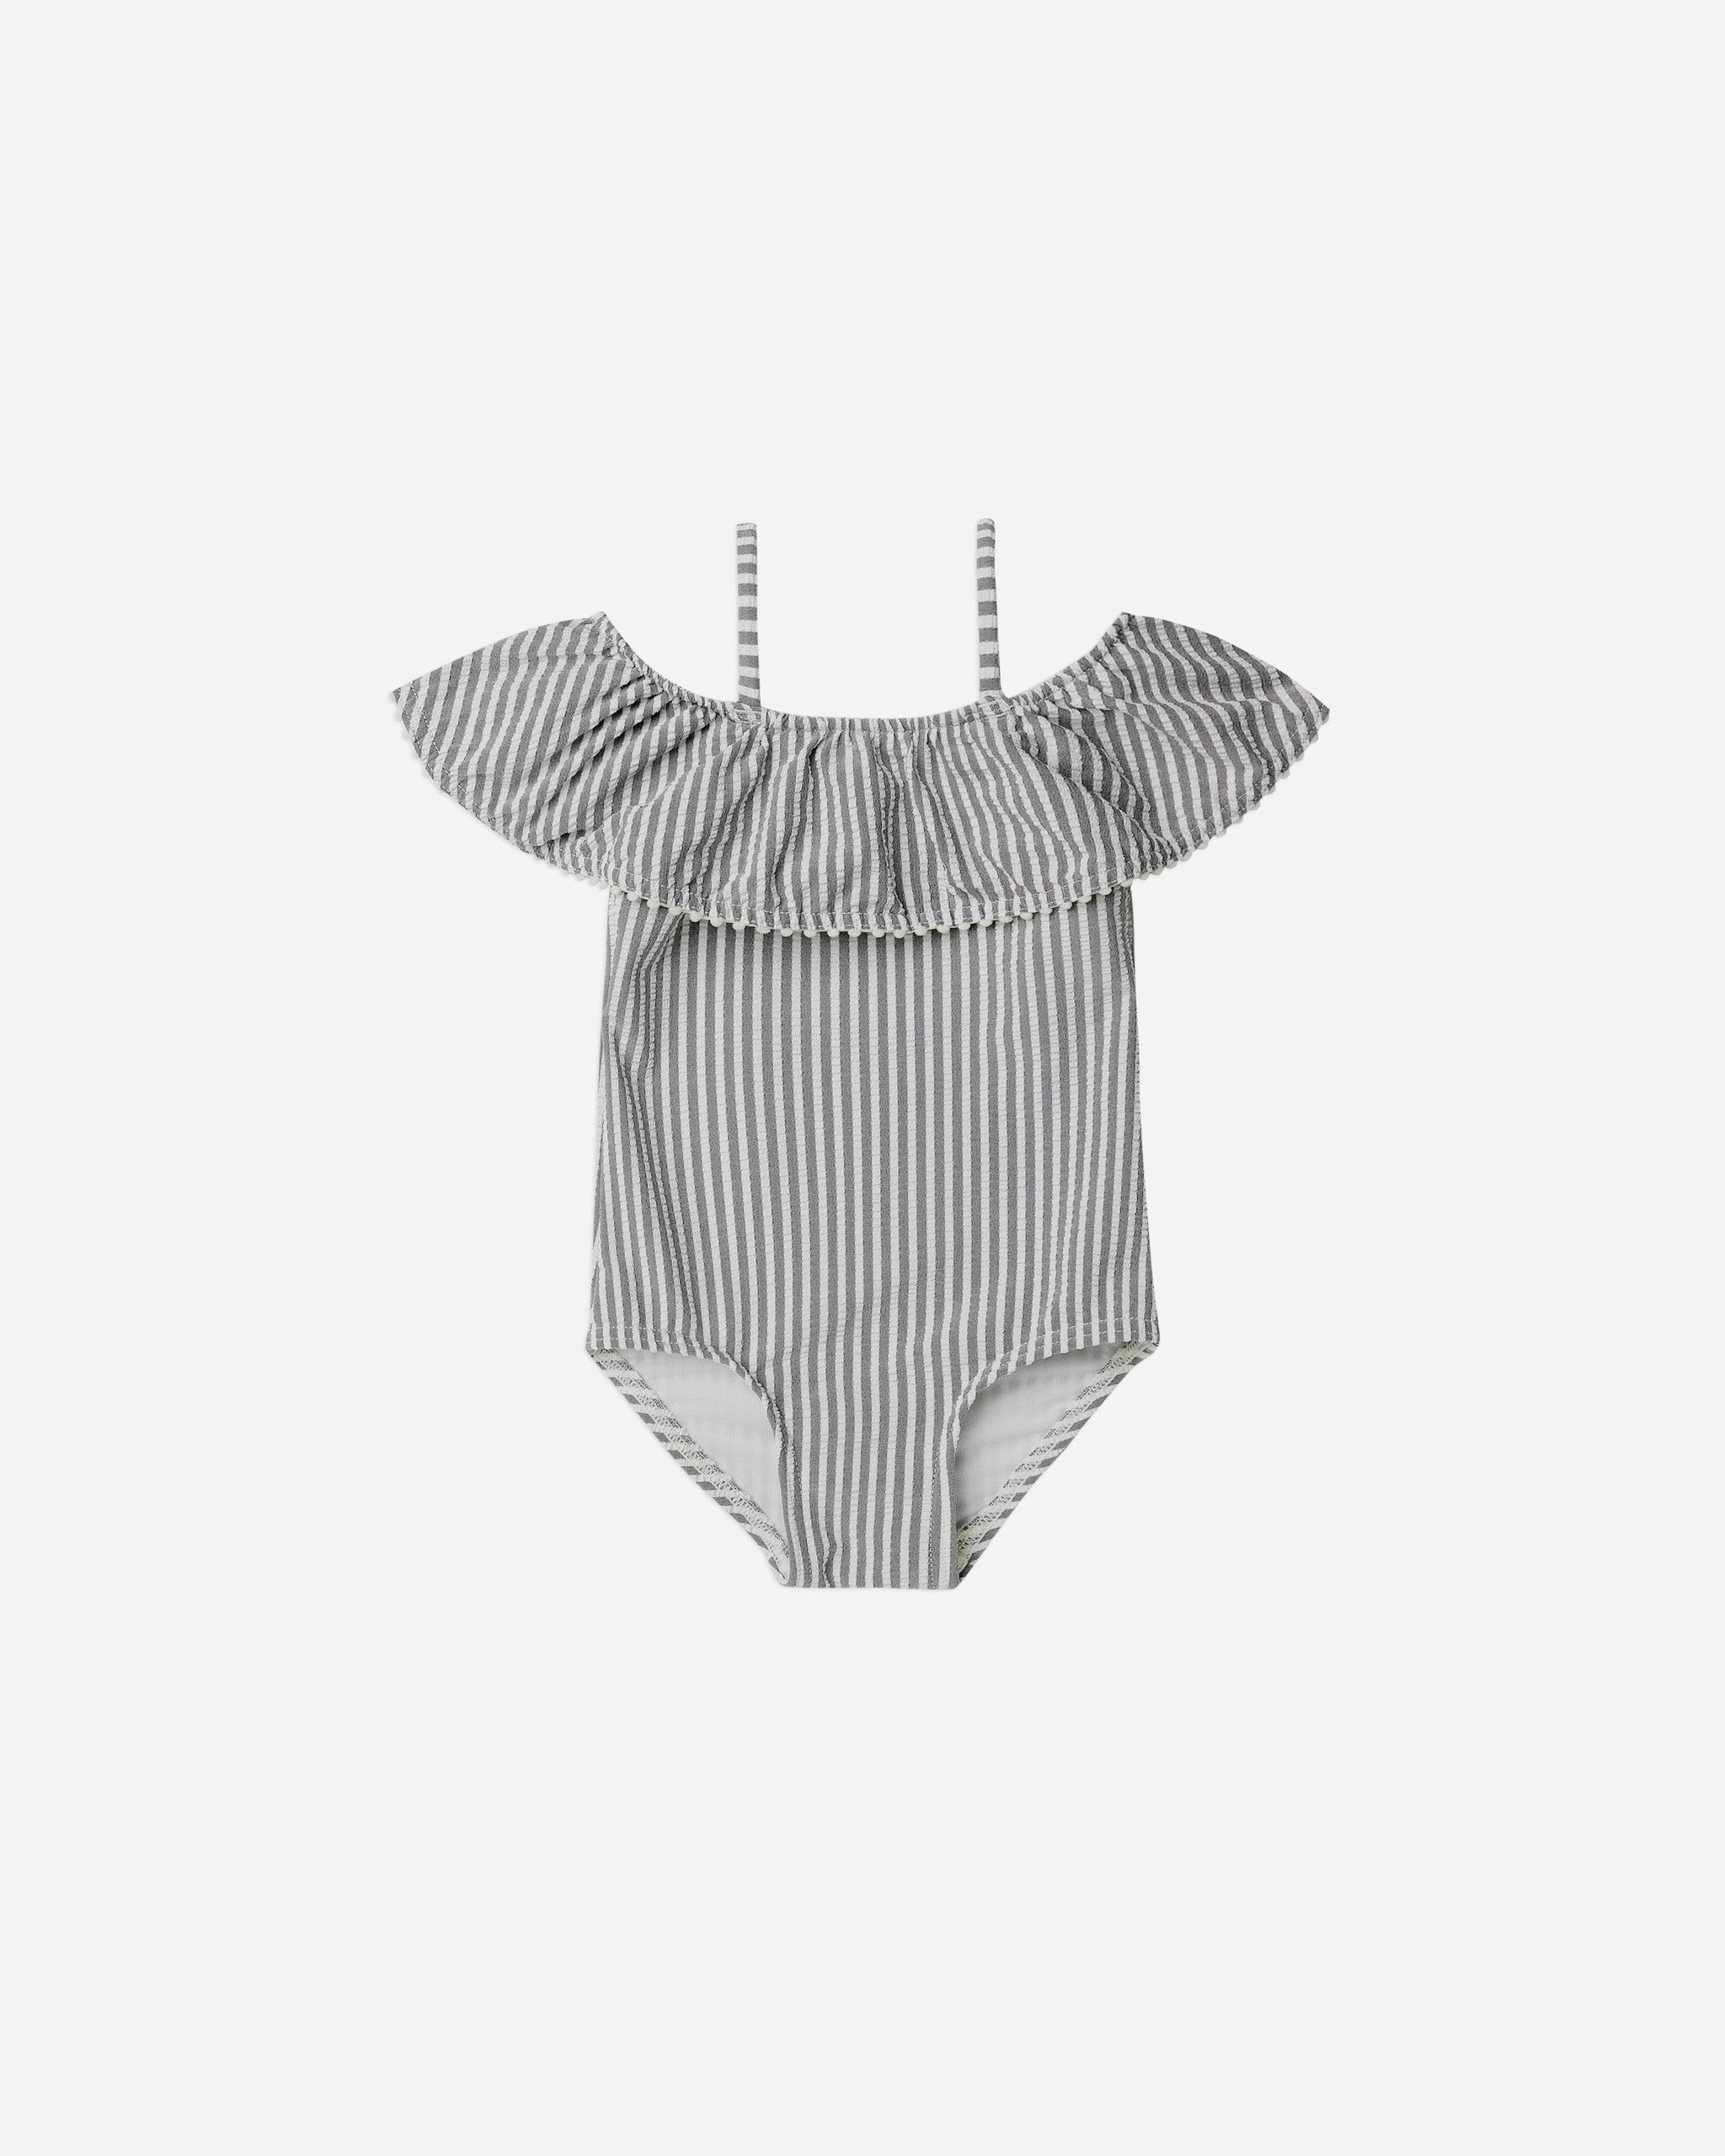 off-the-shoulder one-piece || ink stripe - Rylee + Cru | Kids Clothes | Trendy Baby Clothes | Modern Infant Outfits |